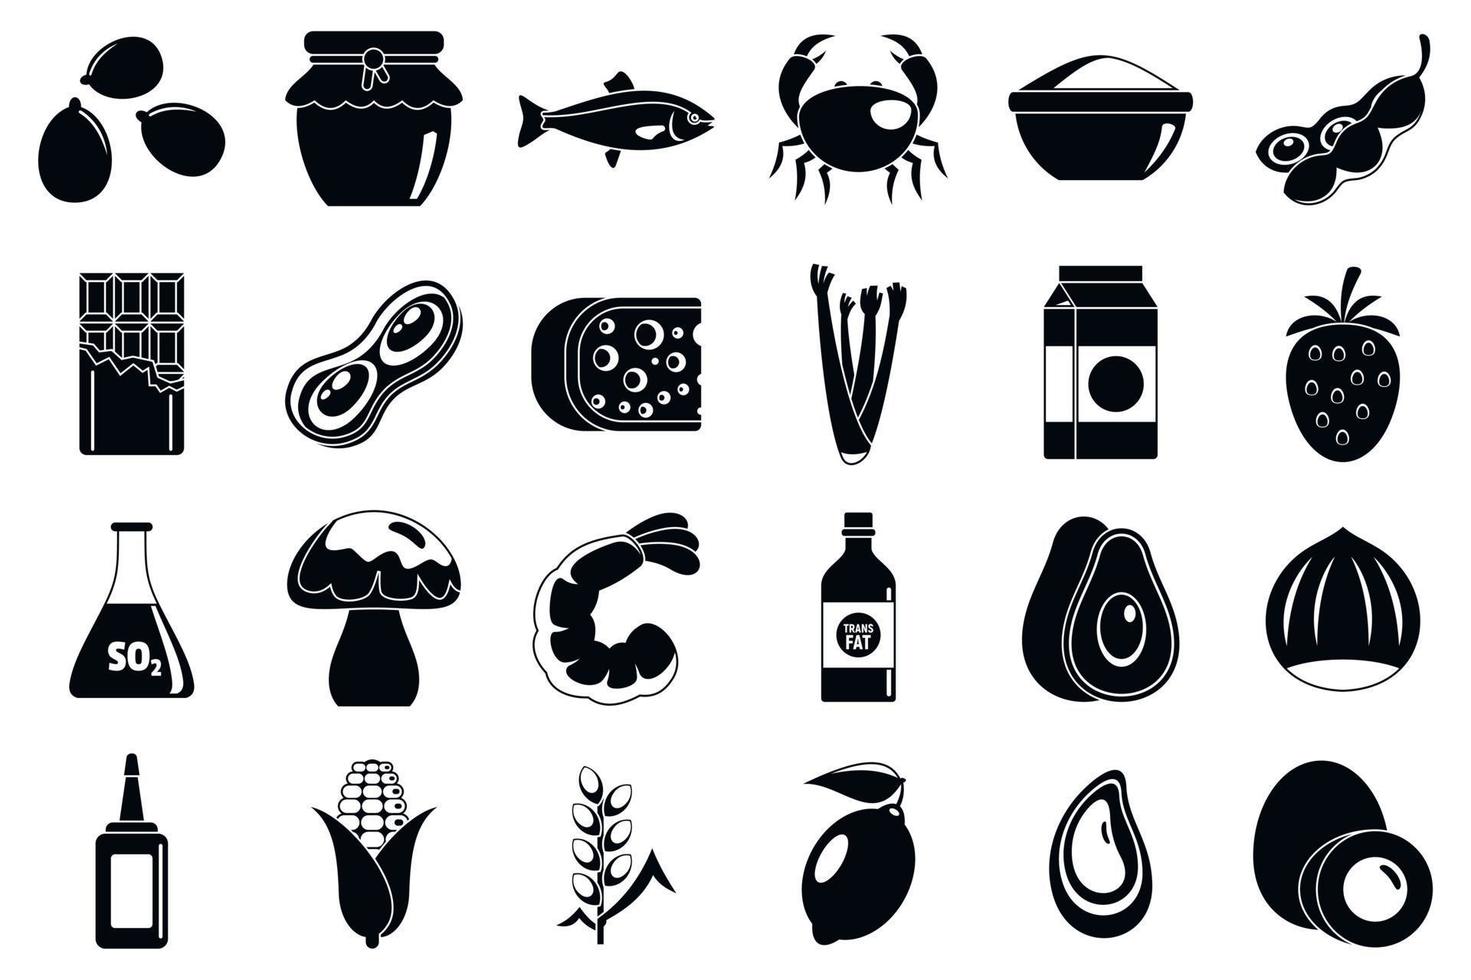 Food allergy intolerance icons set, simple style vector